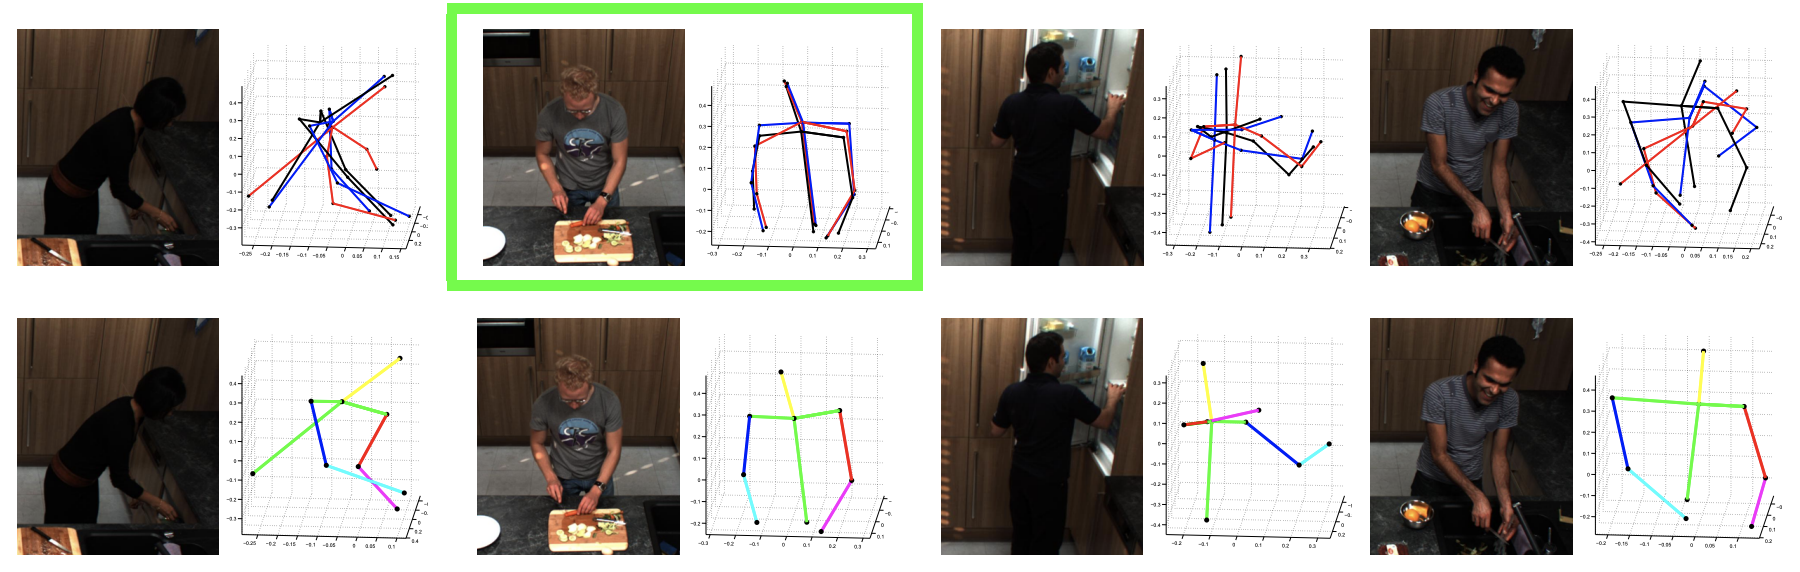 3D Multi-Person Pose Estimation | Papers With Code